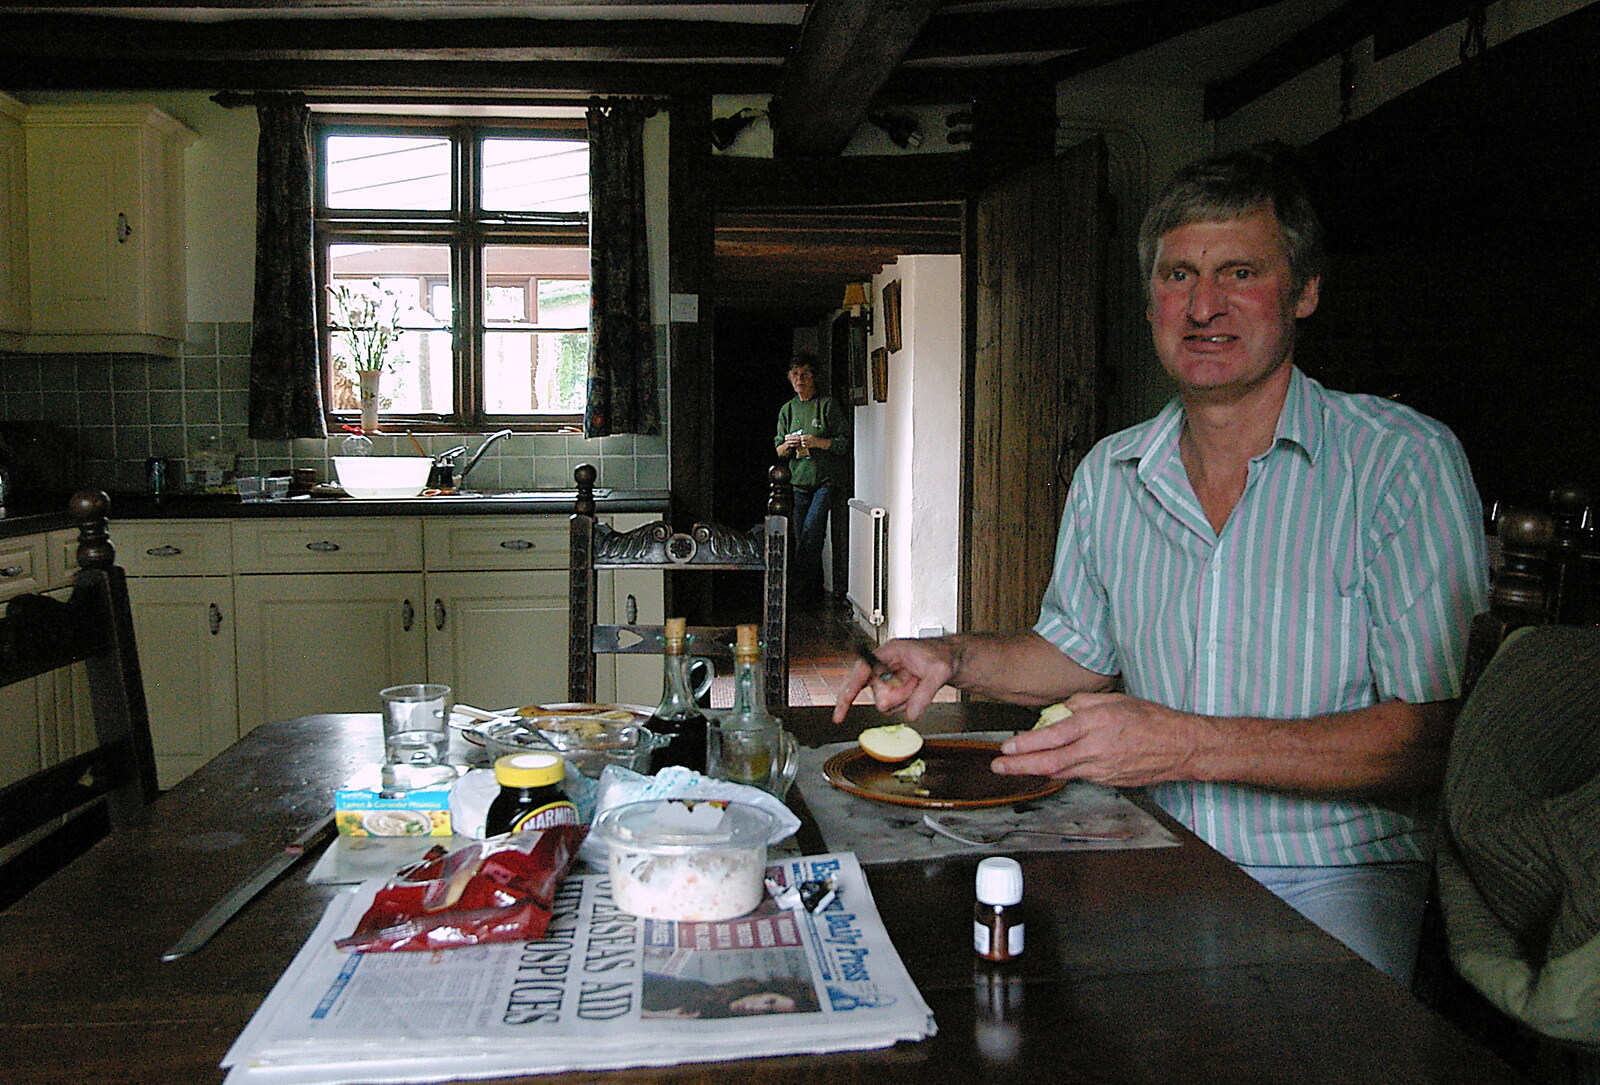 Geoff in the kitchen from The BBS, and the Big Skies of East Anglia, Diss and Hunston, Norfolk and Suffolk - 6th August 2005